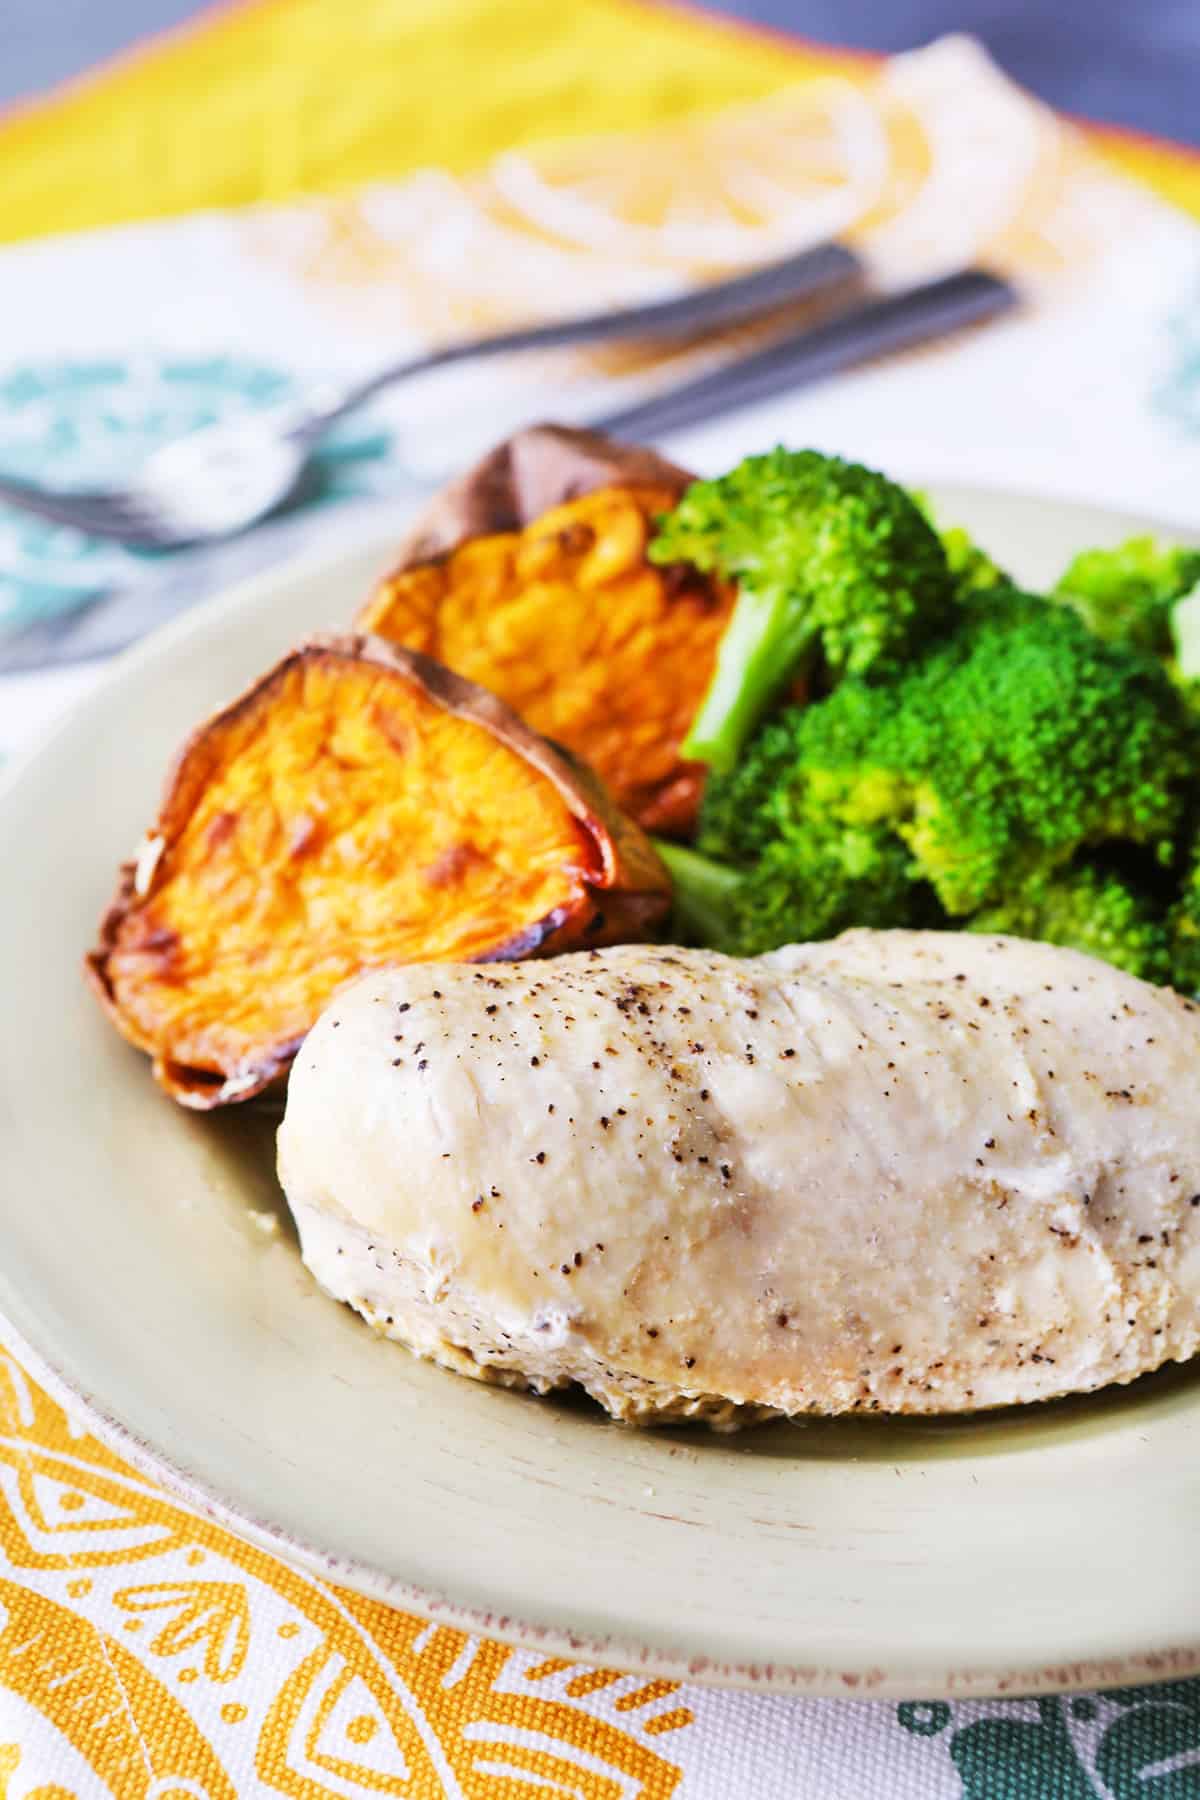 Instant Pot grilled chicken breast on a plate alongside broccoli and sweet potatoes.